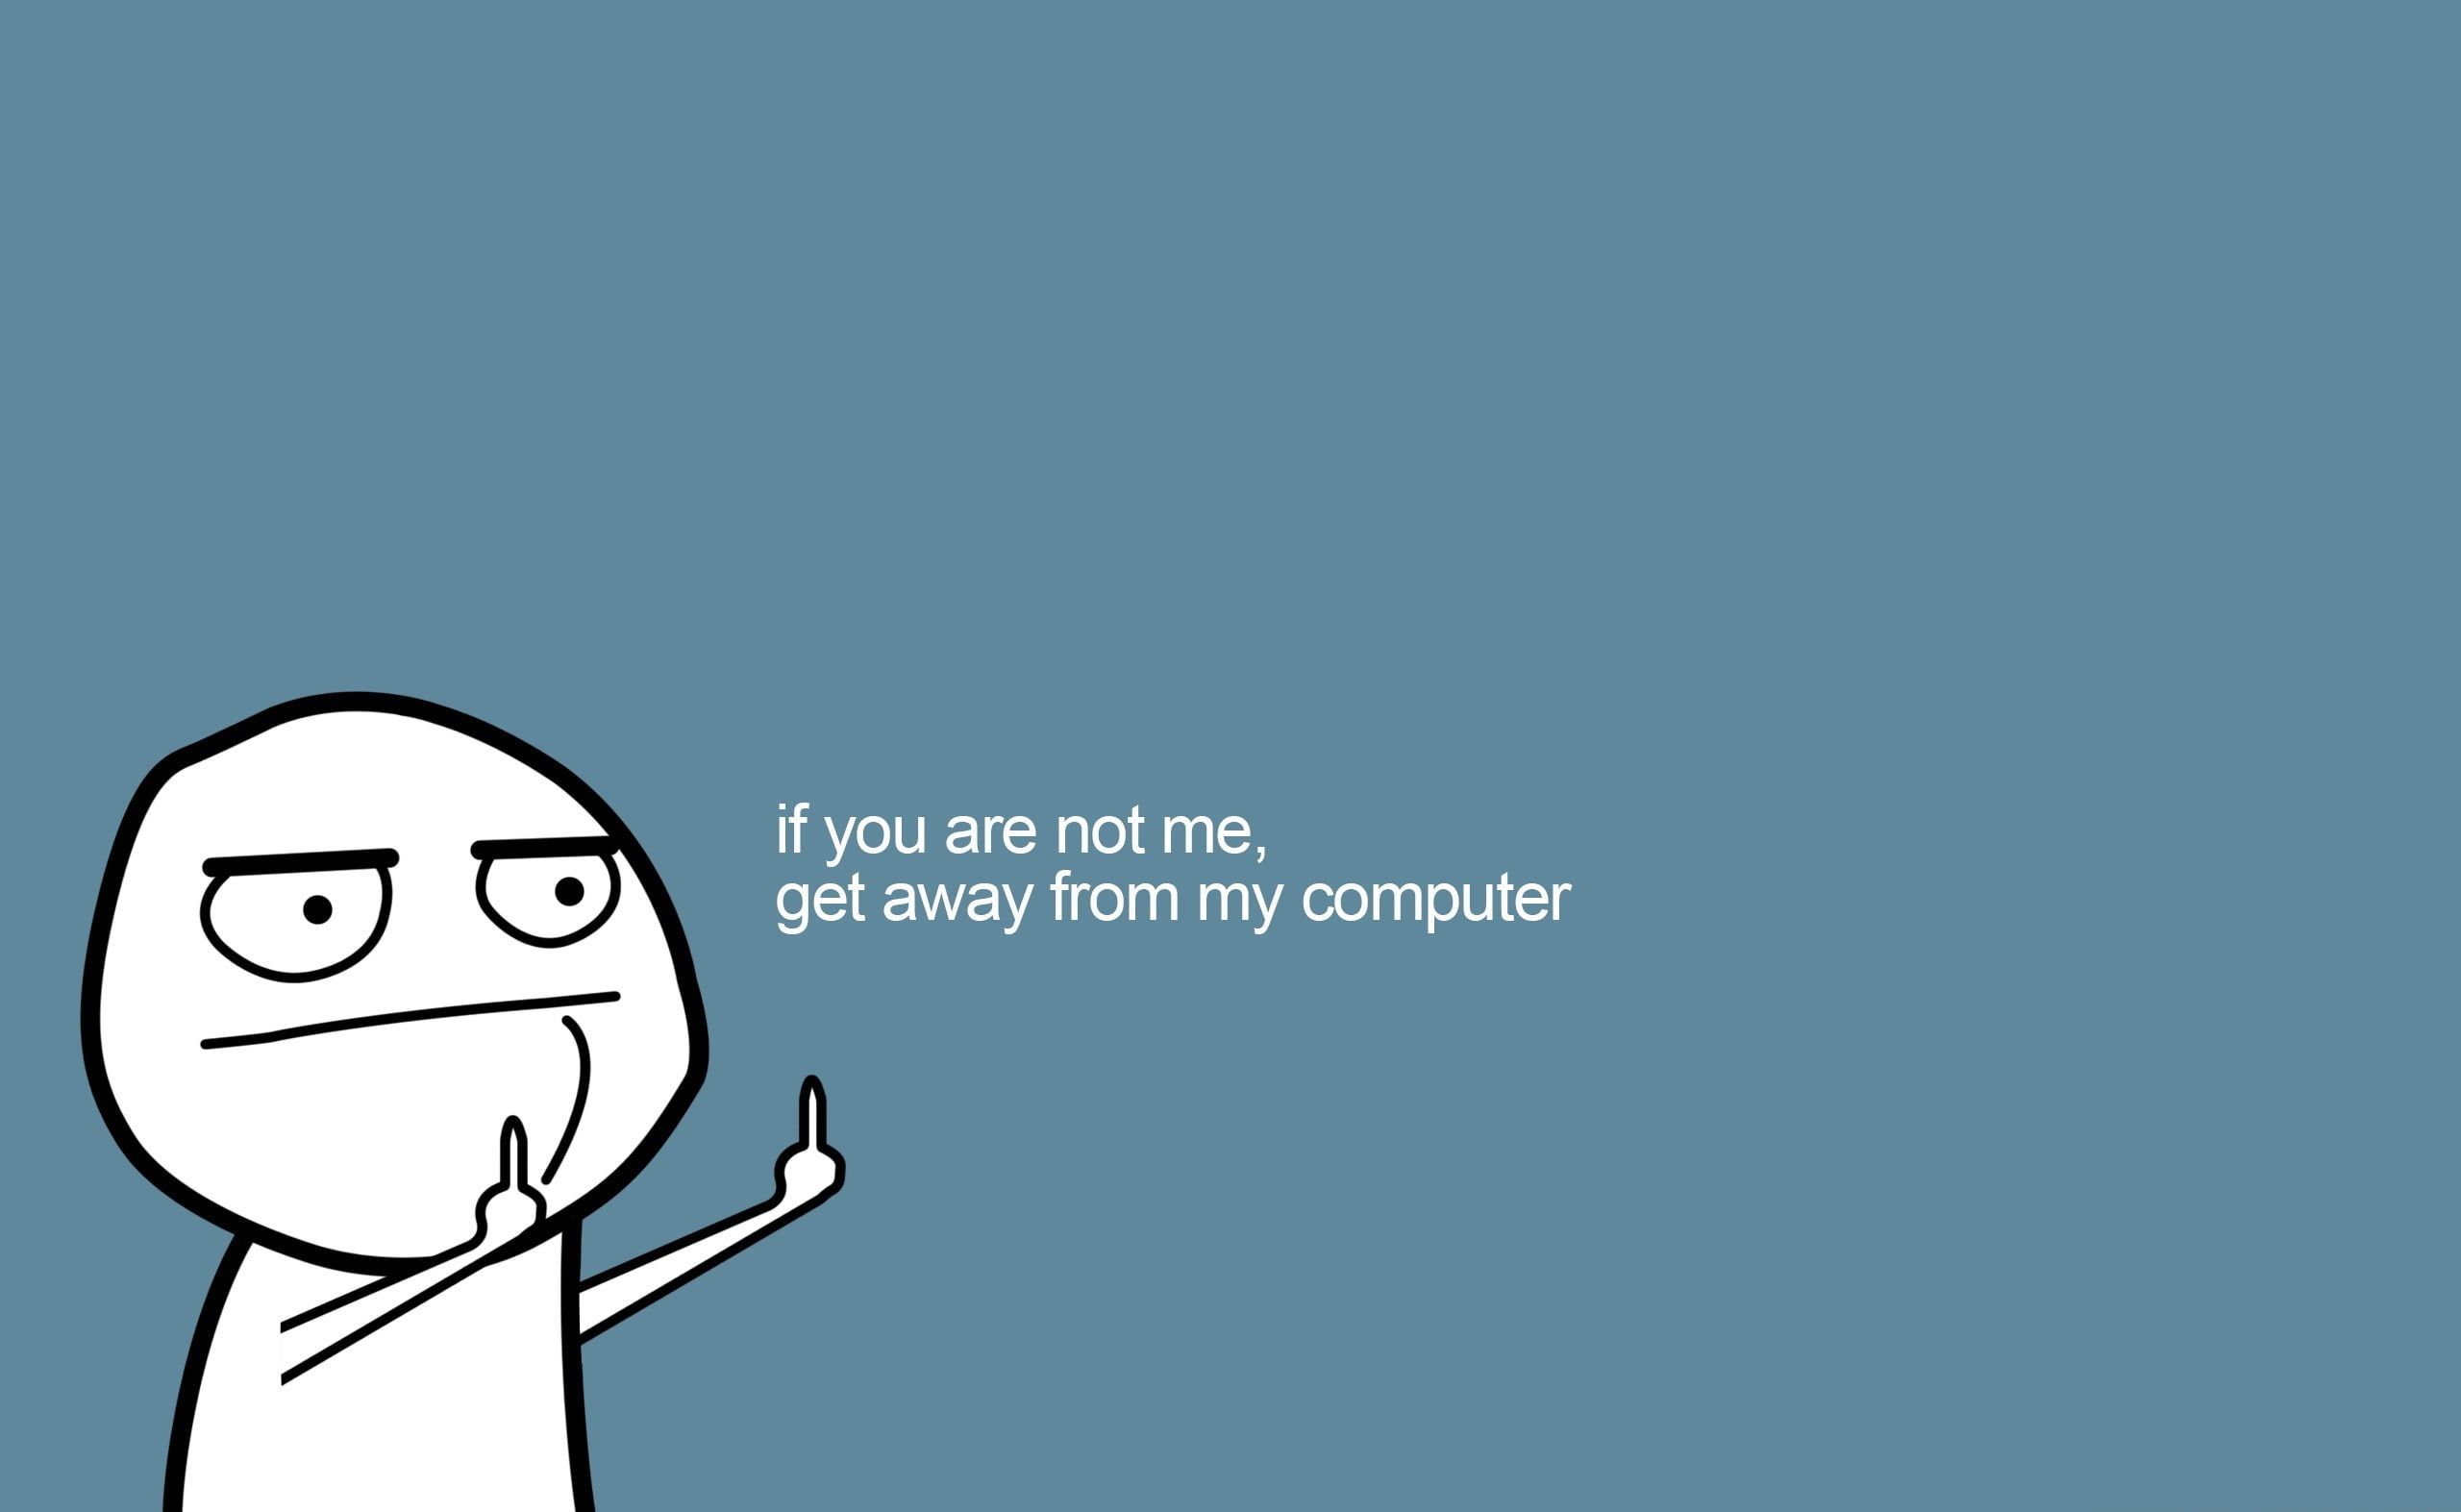 Get Away From My Computer, if you are not me, get away from my computer meme wal. Computer wallpaper desktop wallpaper, Aesthetic desktop wallpaper, Wallpaper pc